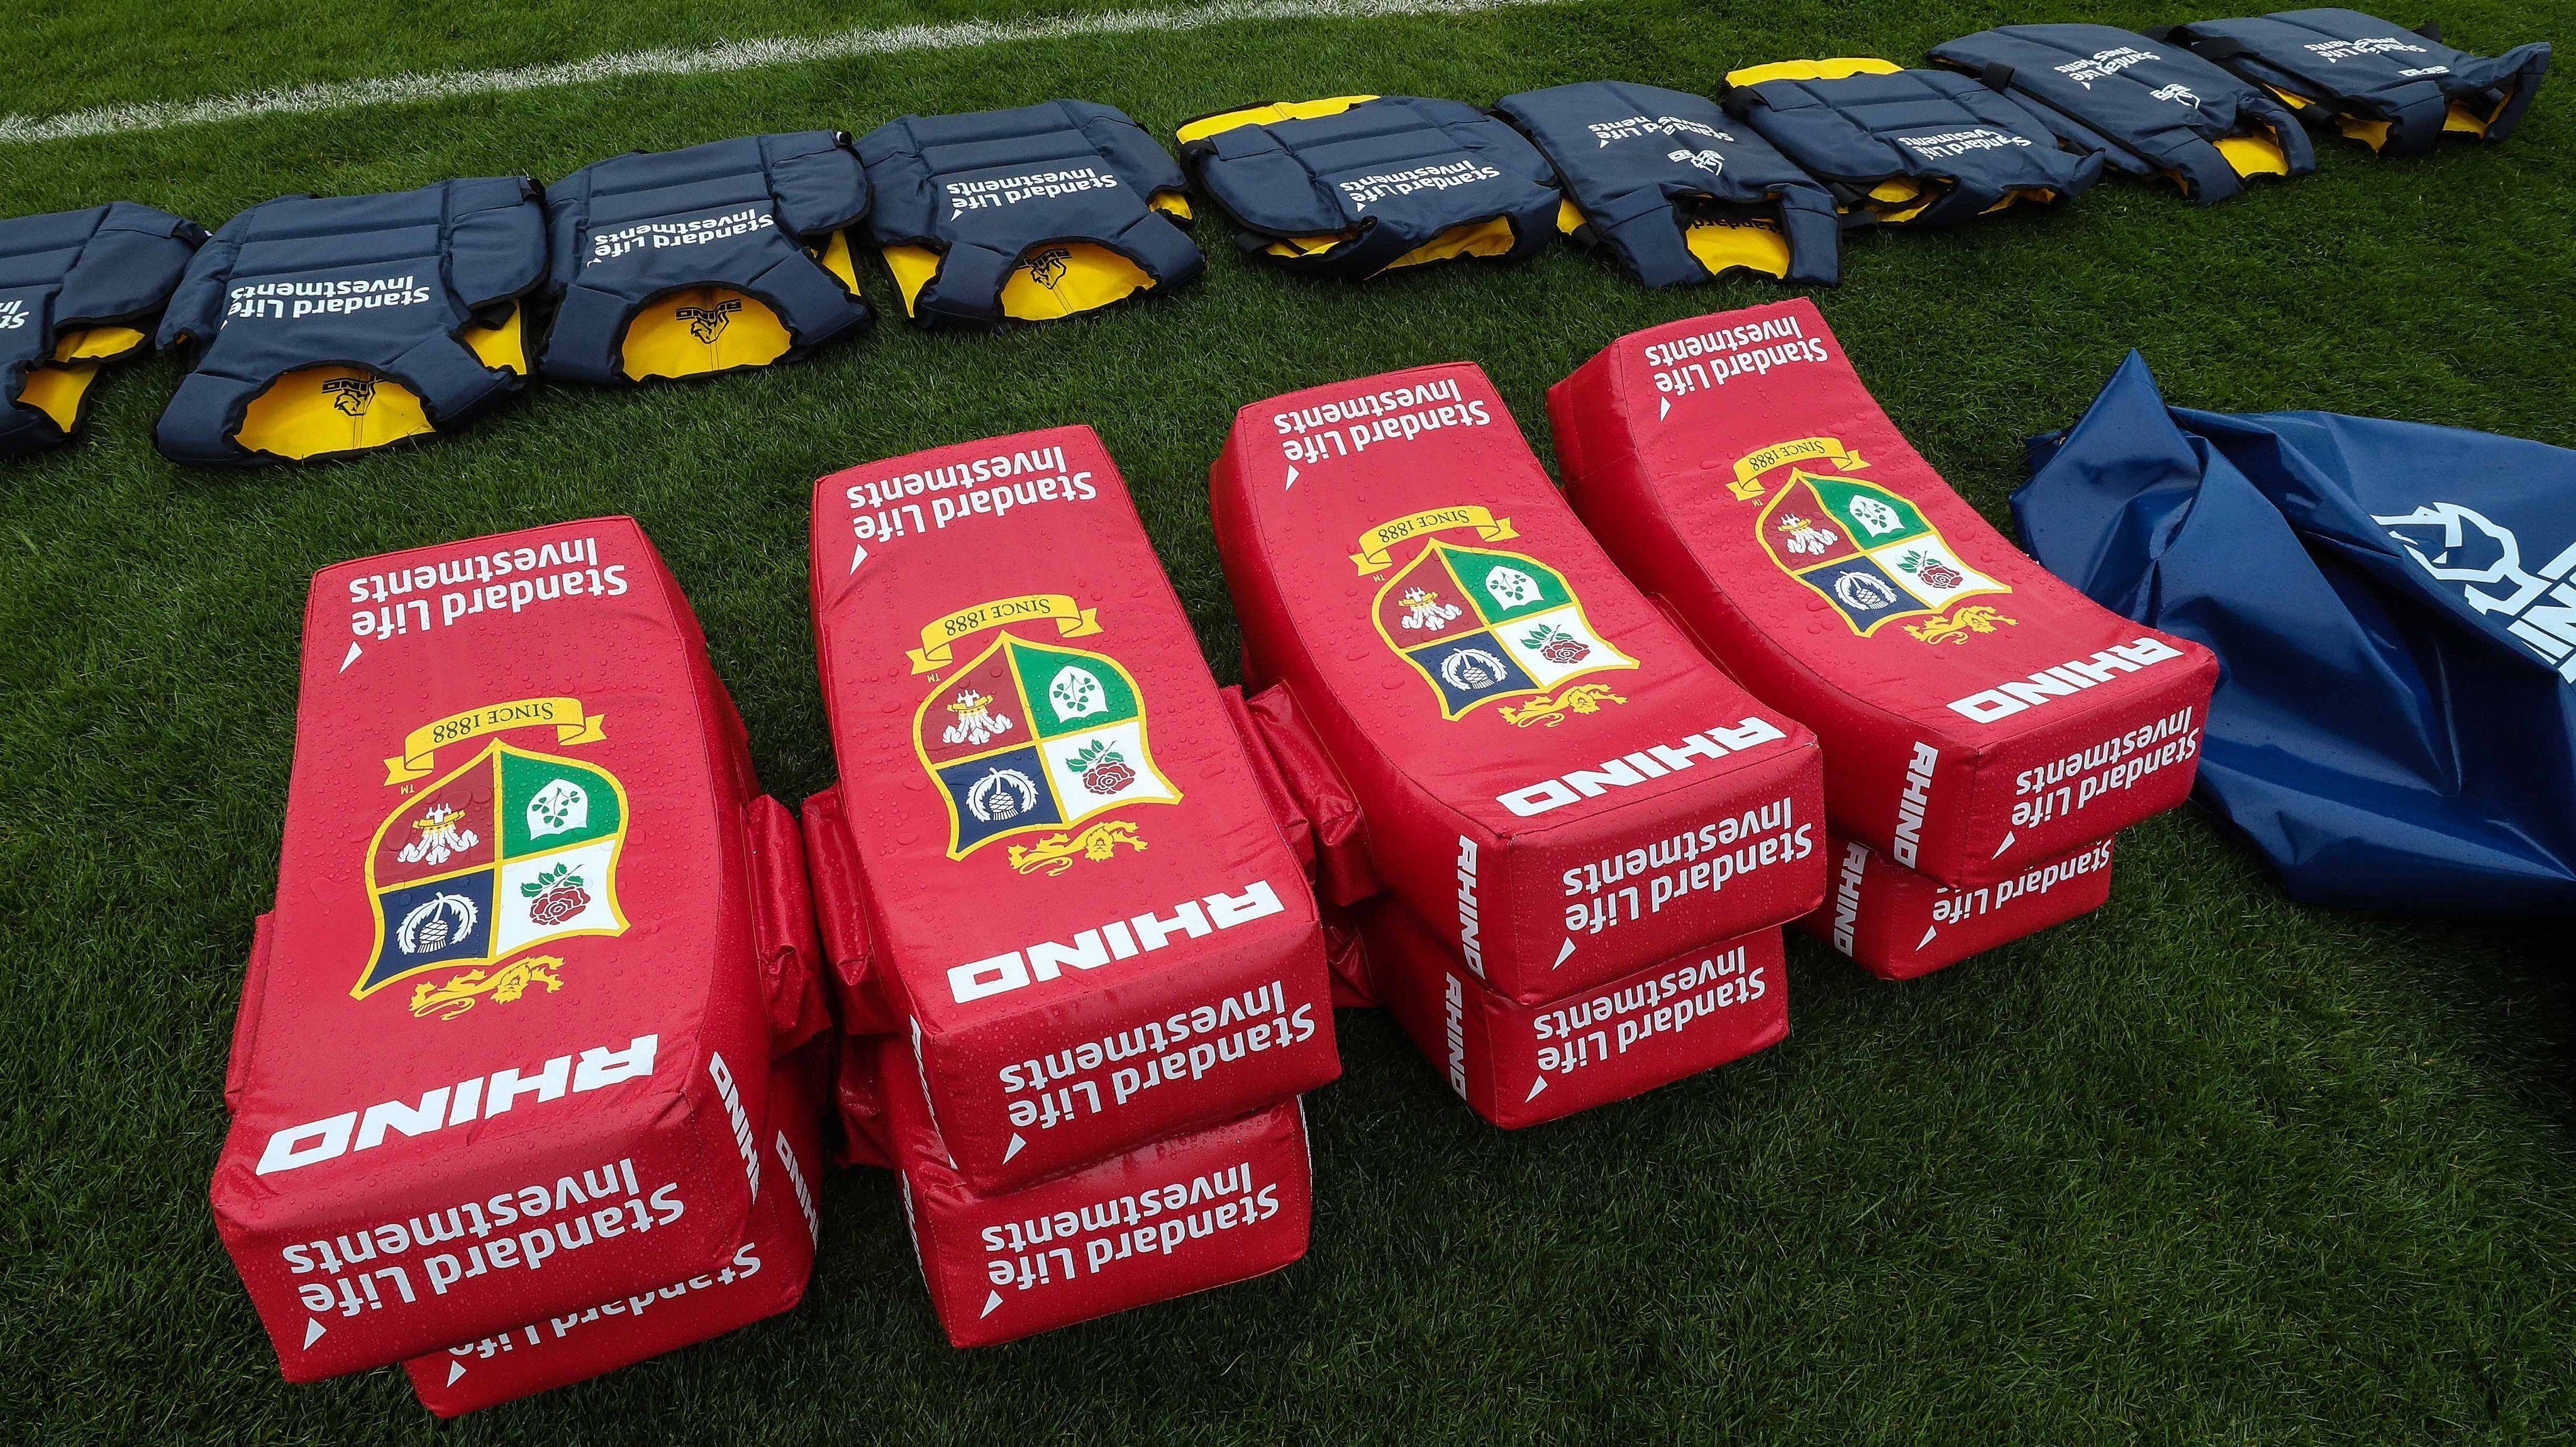 The 1,211 pieces of training equipment used by The British & Irish Lions in New Zealand